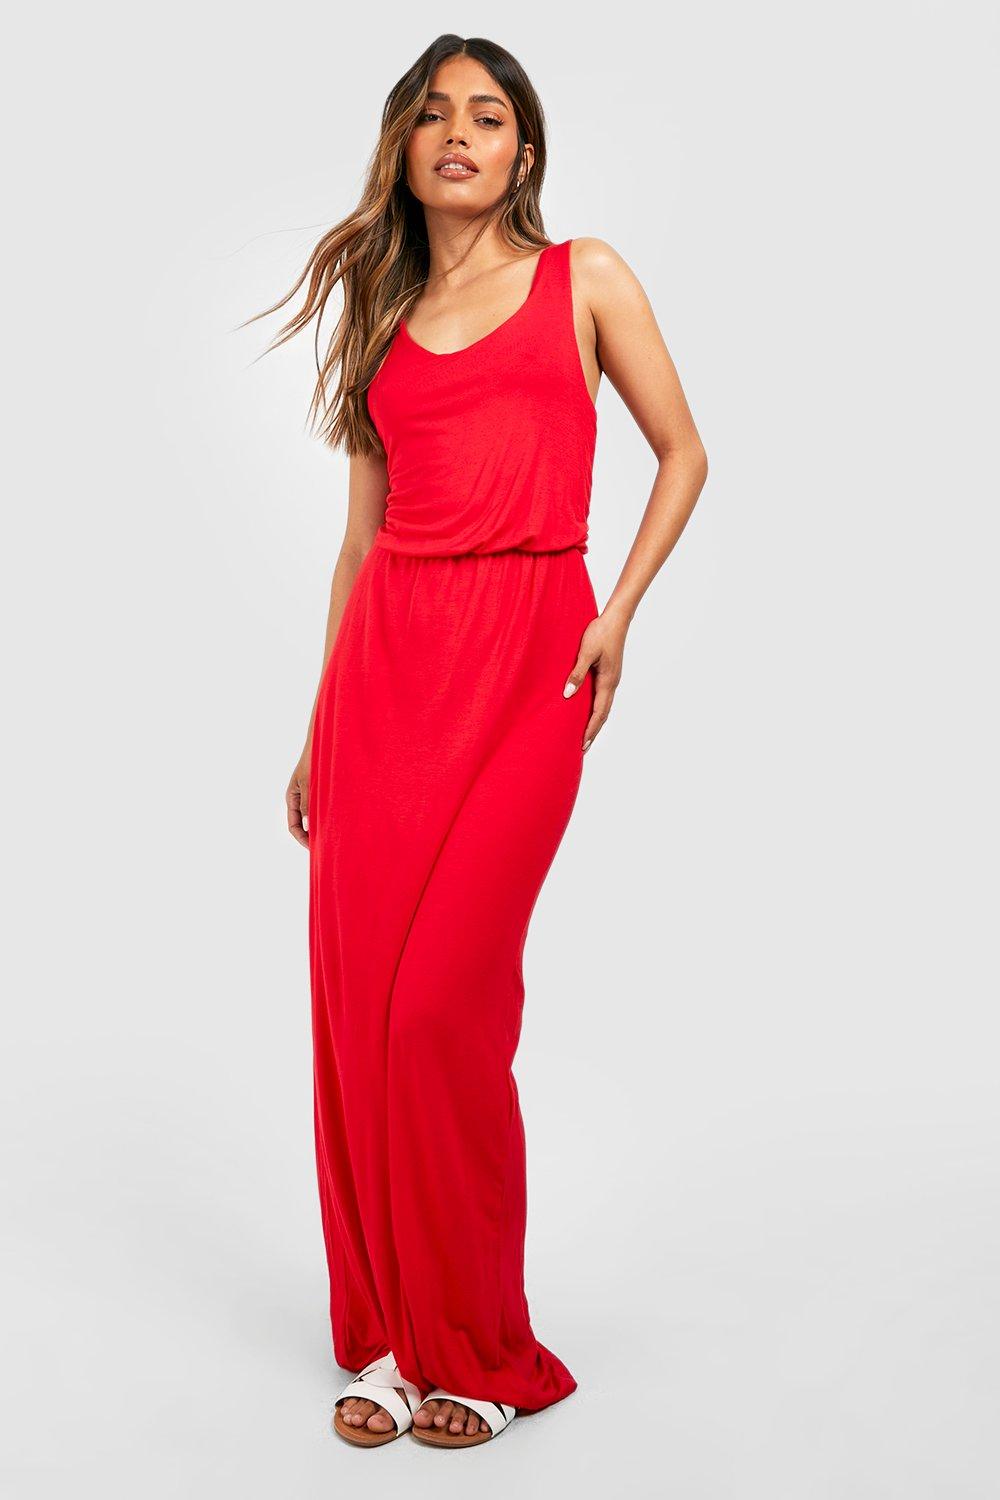 Womens Racer Back Maxi Dress - Red - 6, Red